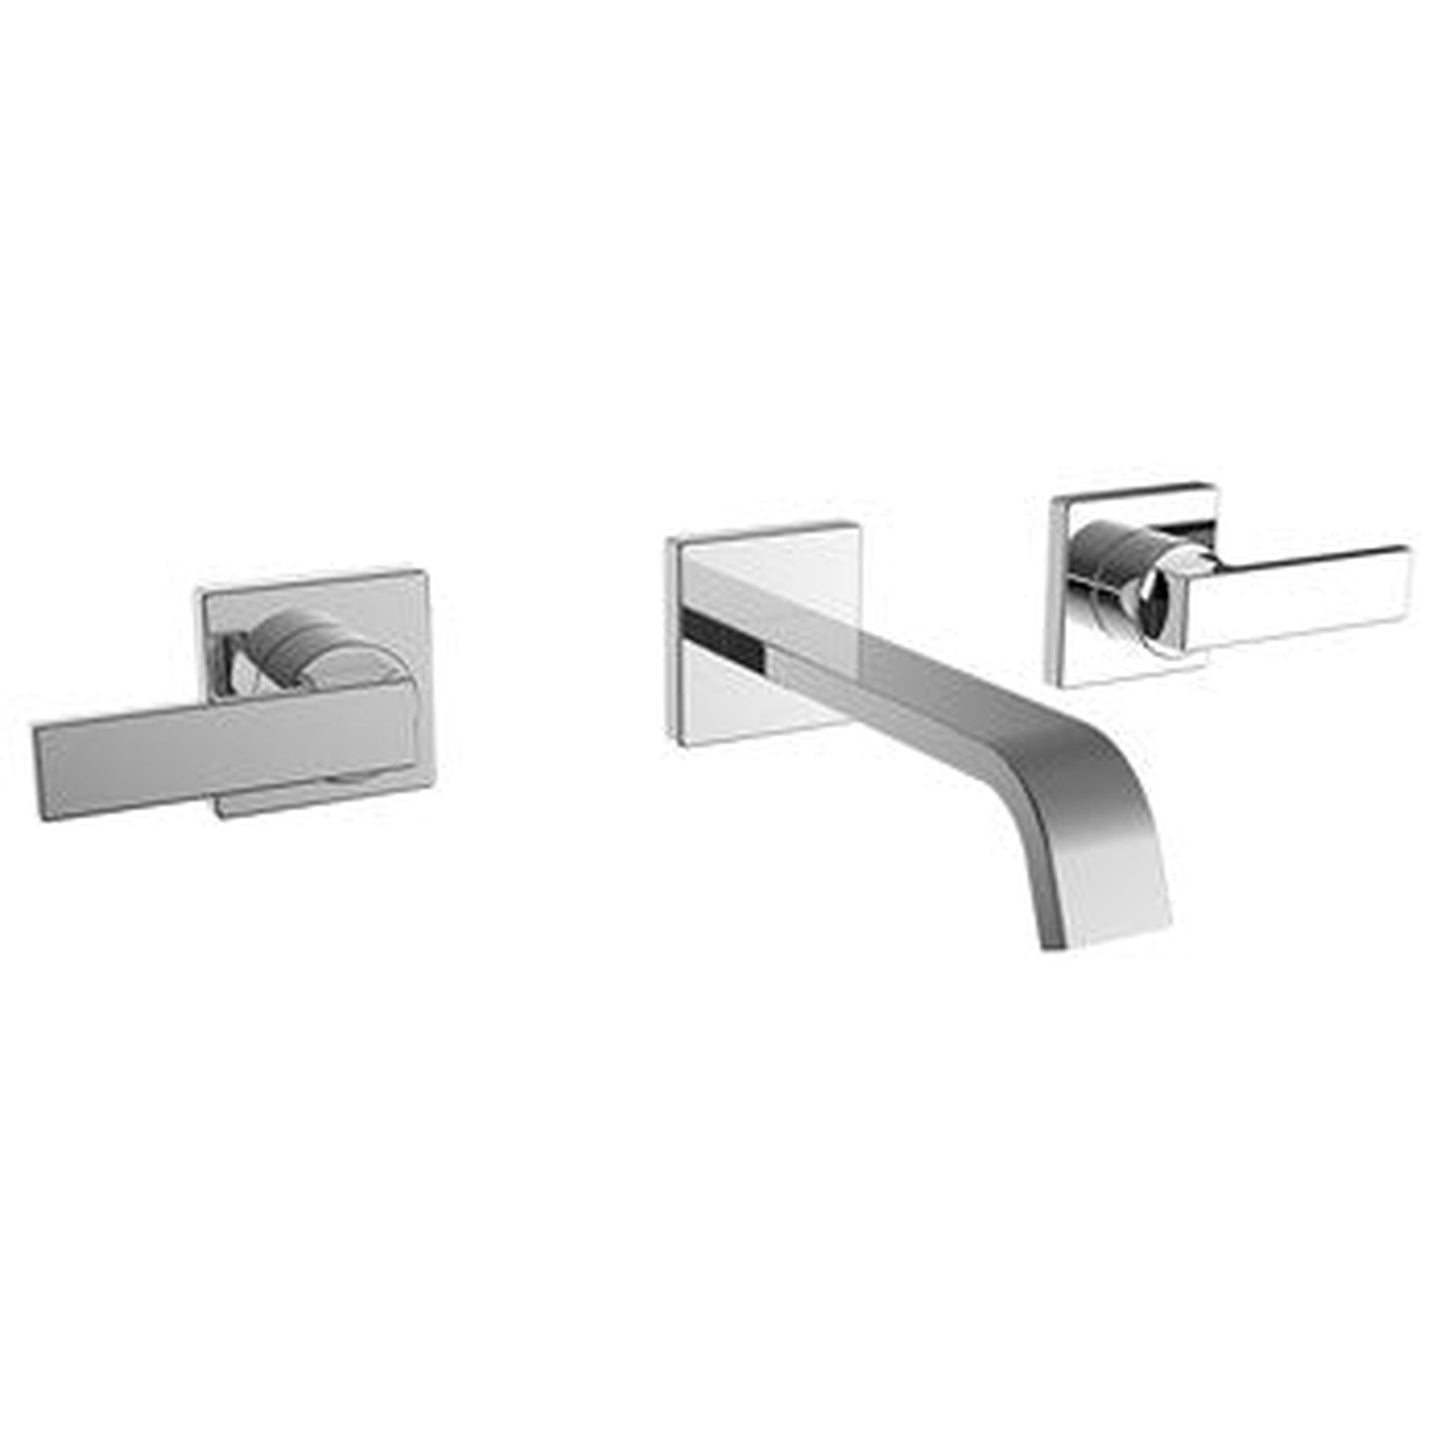 Speakman Lura 1.2 GPM Polished Chrome Wall Mounted Faucet